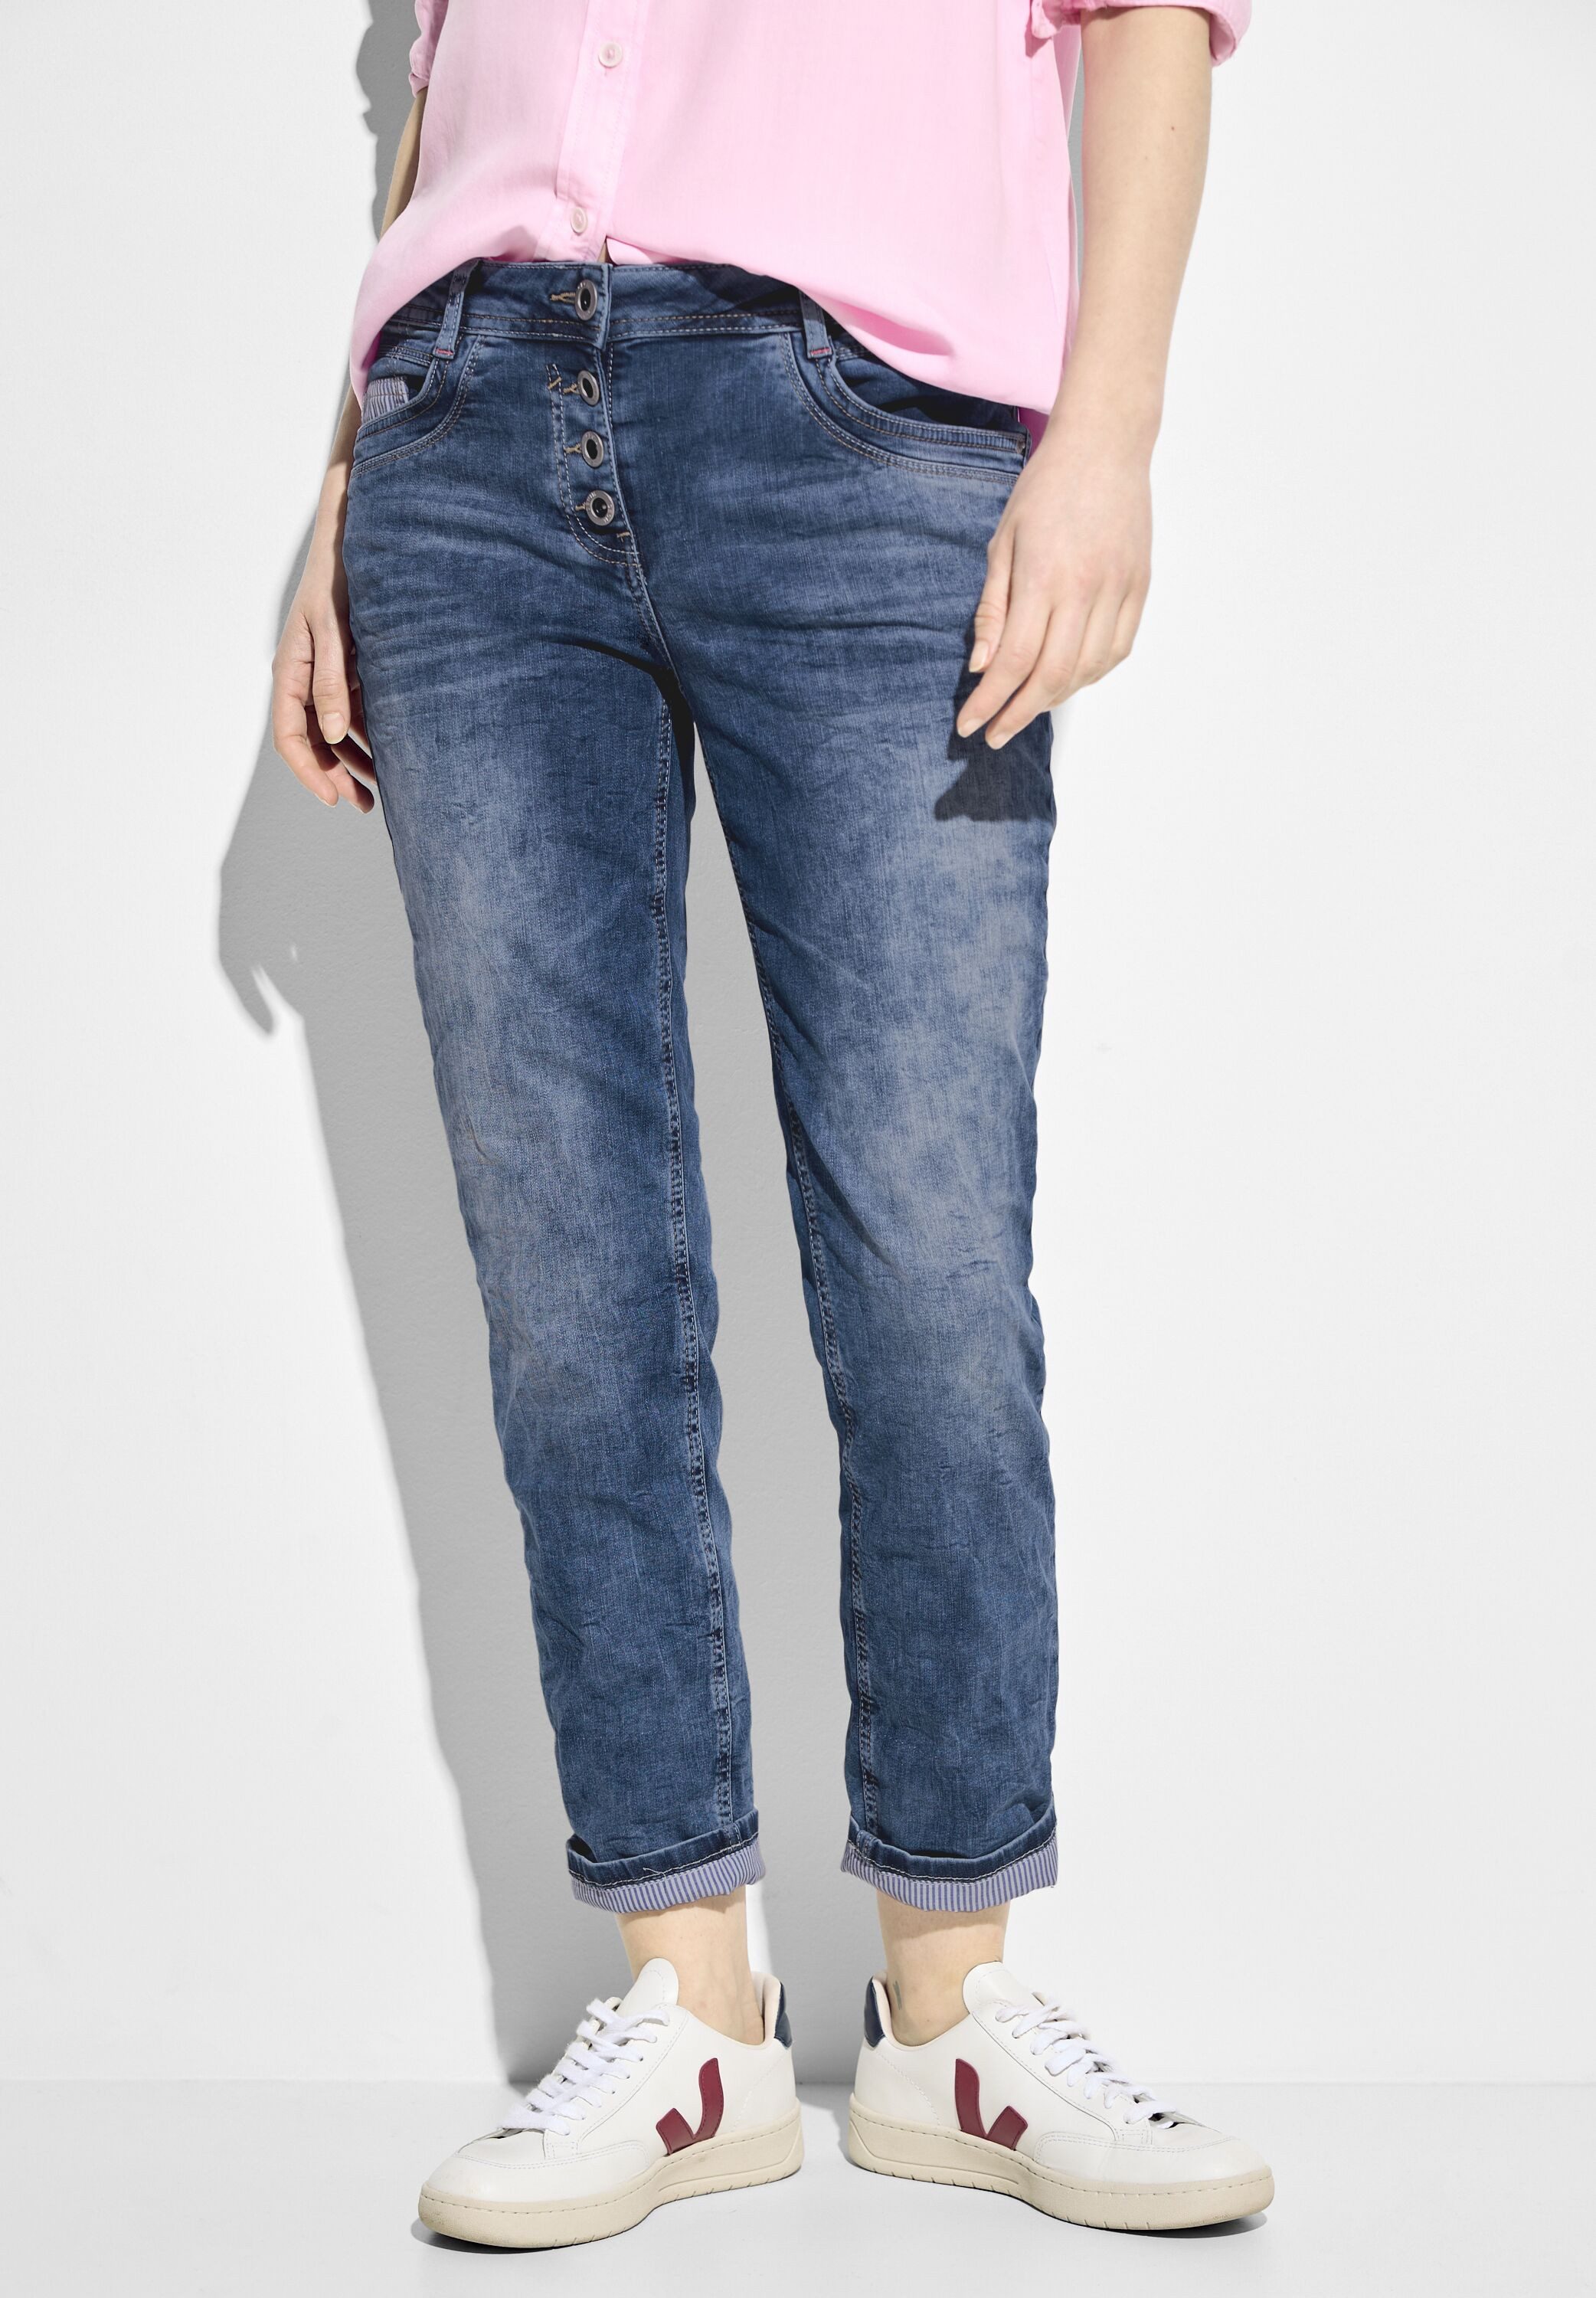 Cecil 7/8 jeans